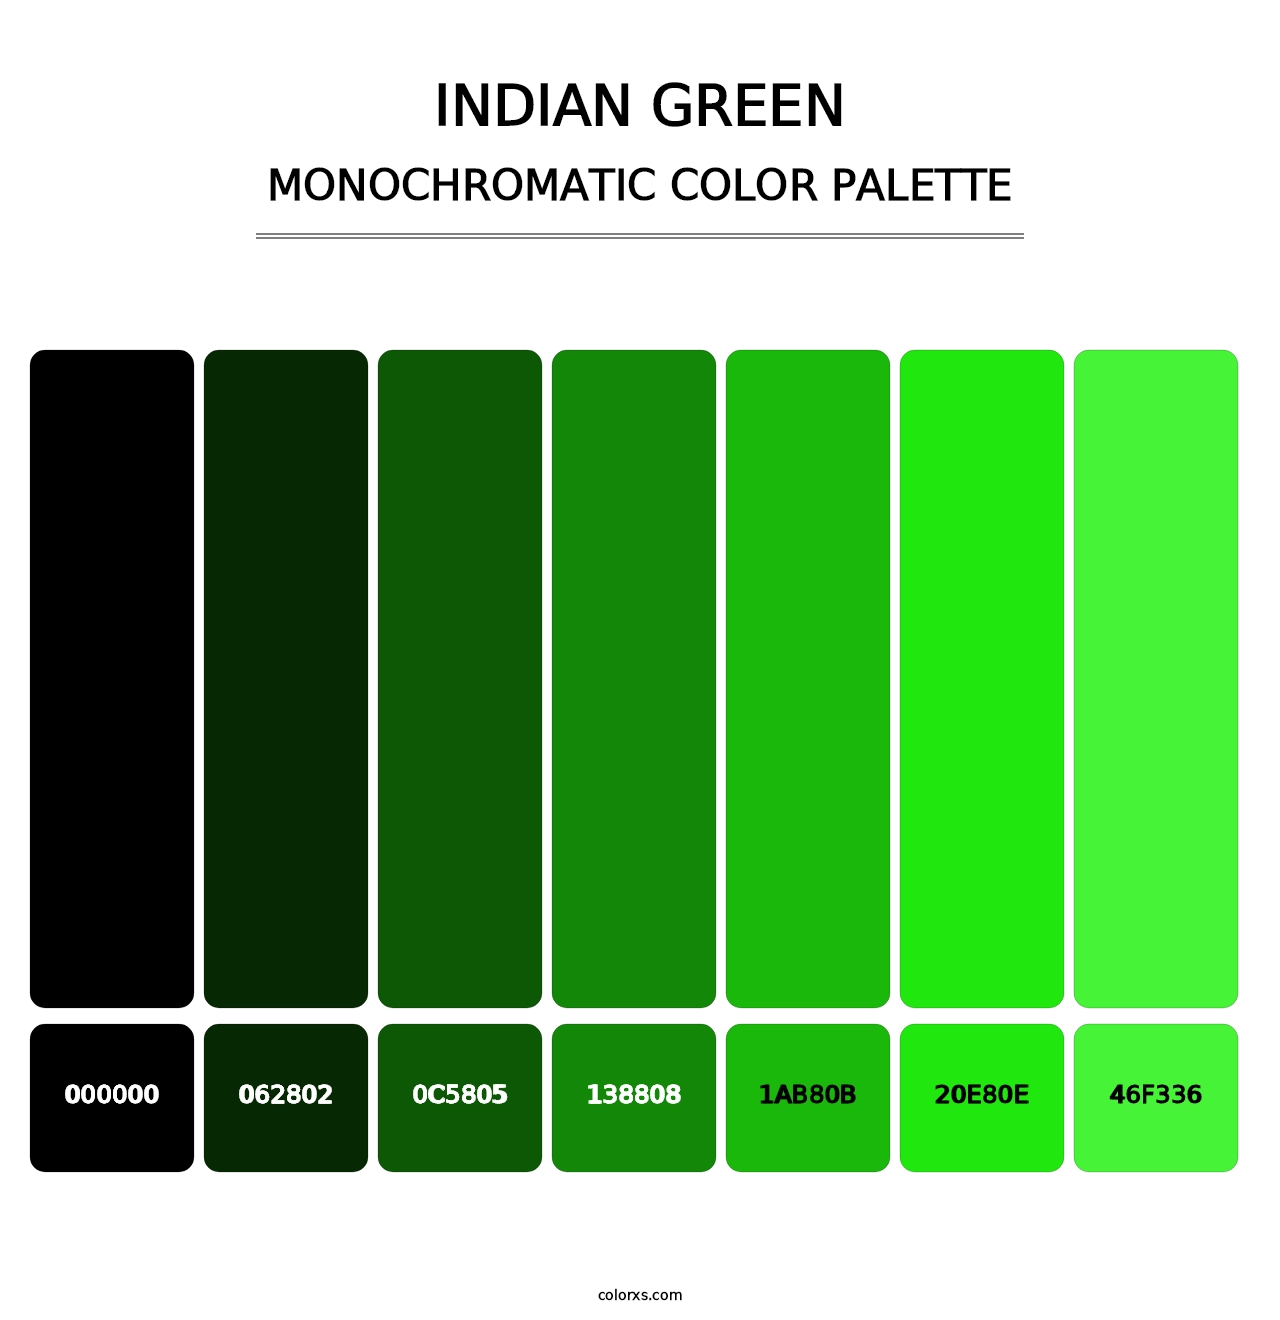 Indian Green - Monochromatic Color Palette